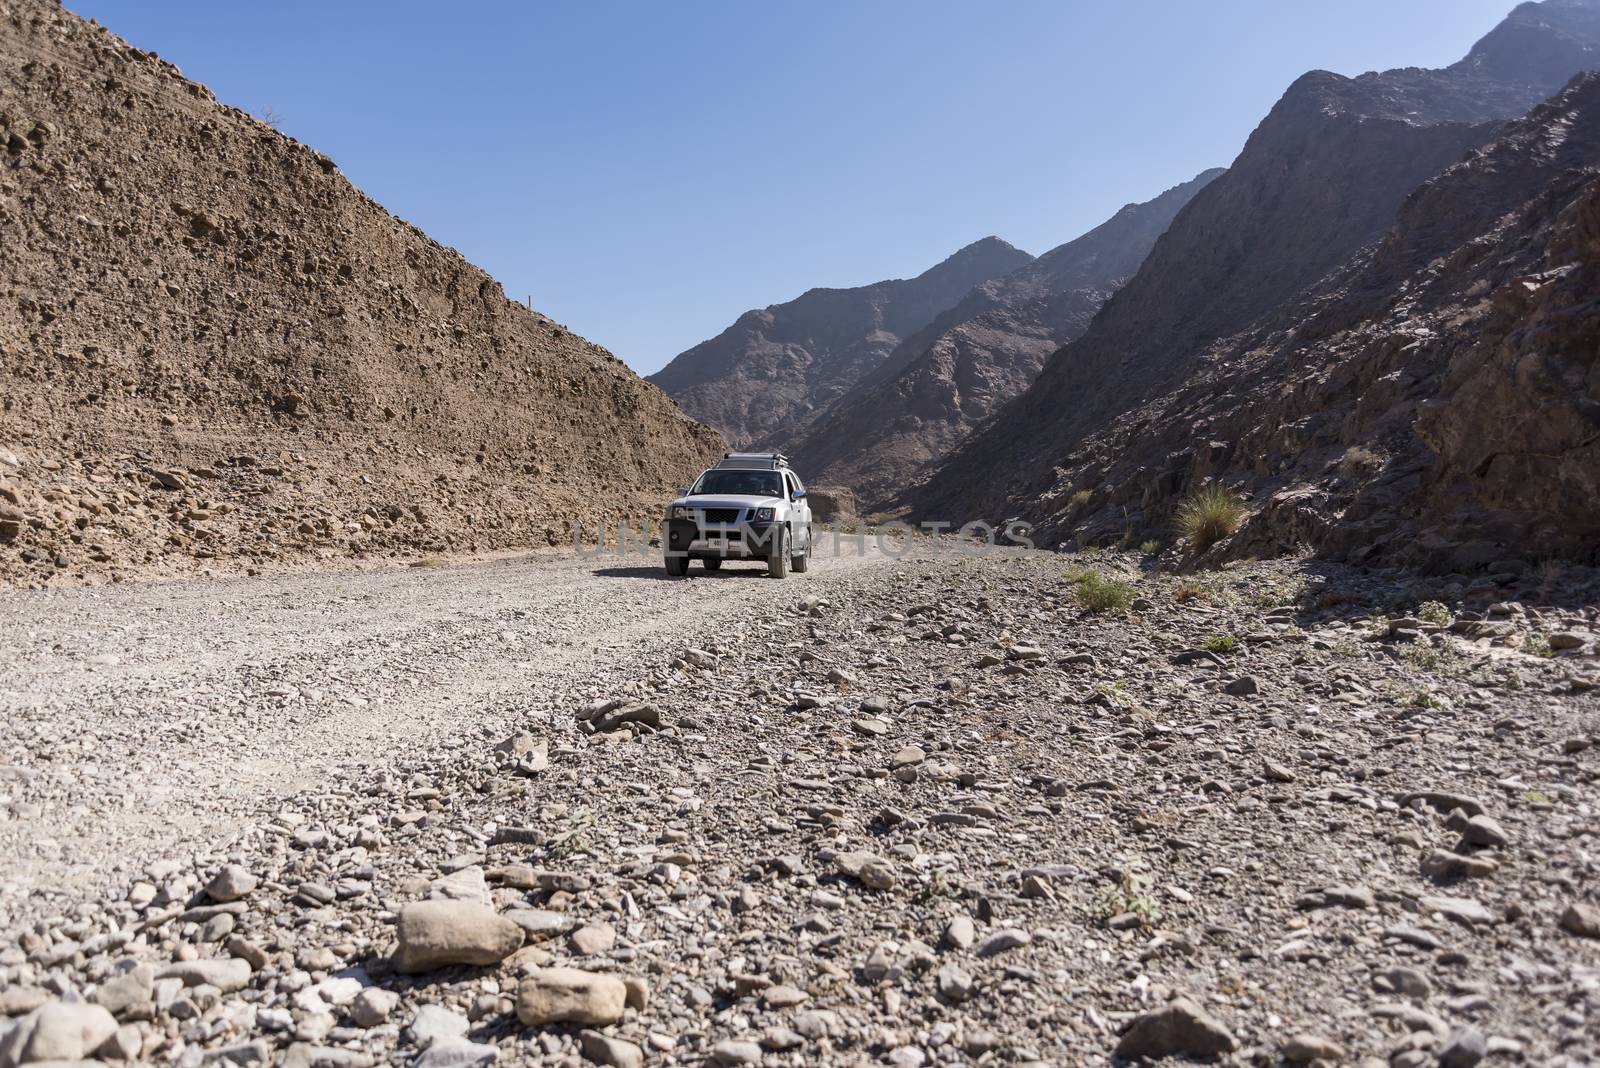 4x4 vehicle in a Wadi (dry riverbed) of Fujairah Emirates, United Arab Emirates.
The small SUV is on a path in a small canyon.